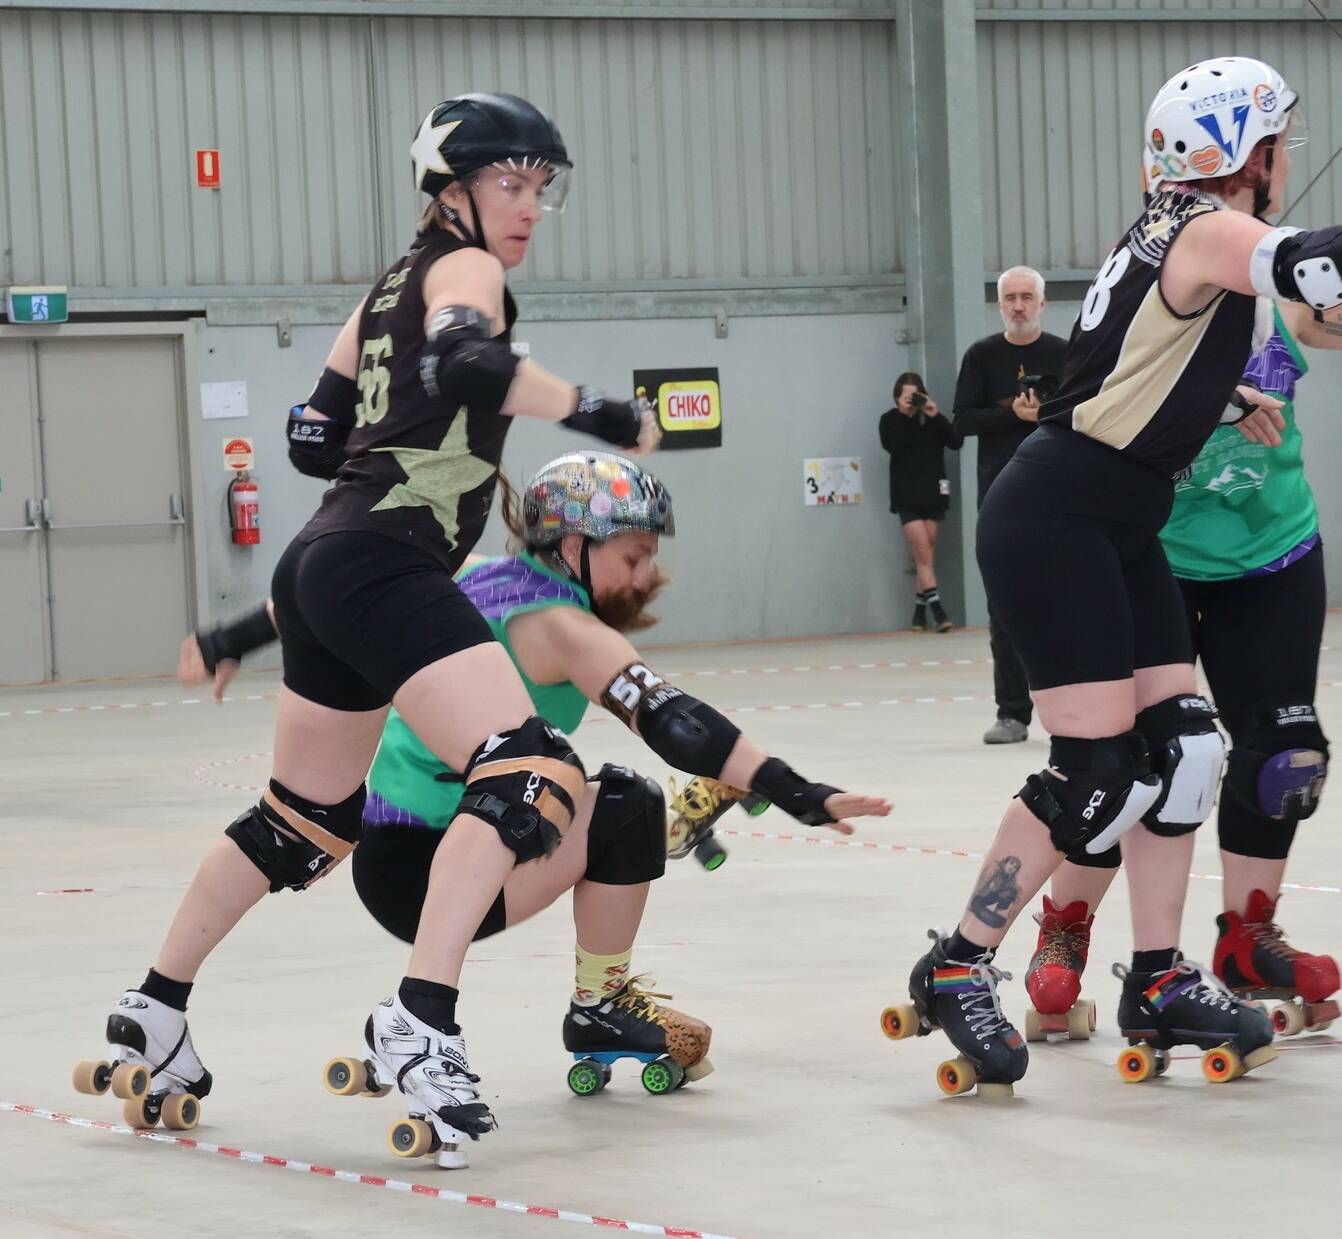 10 Things I've Learned Over A Decade In Roller Derby